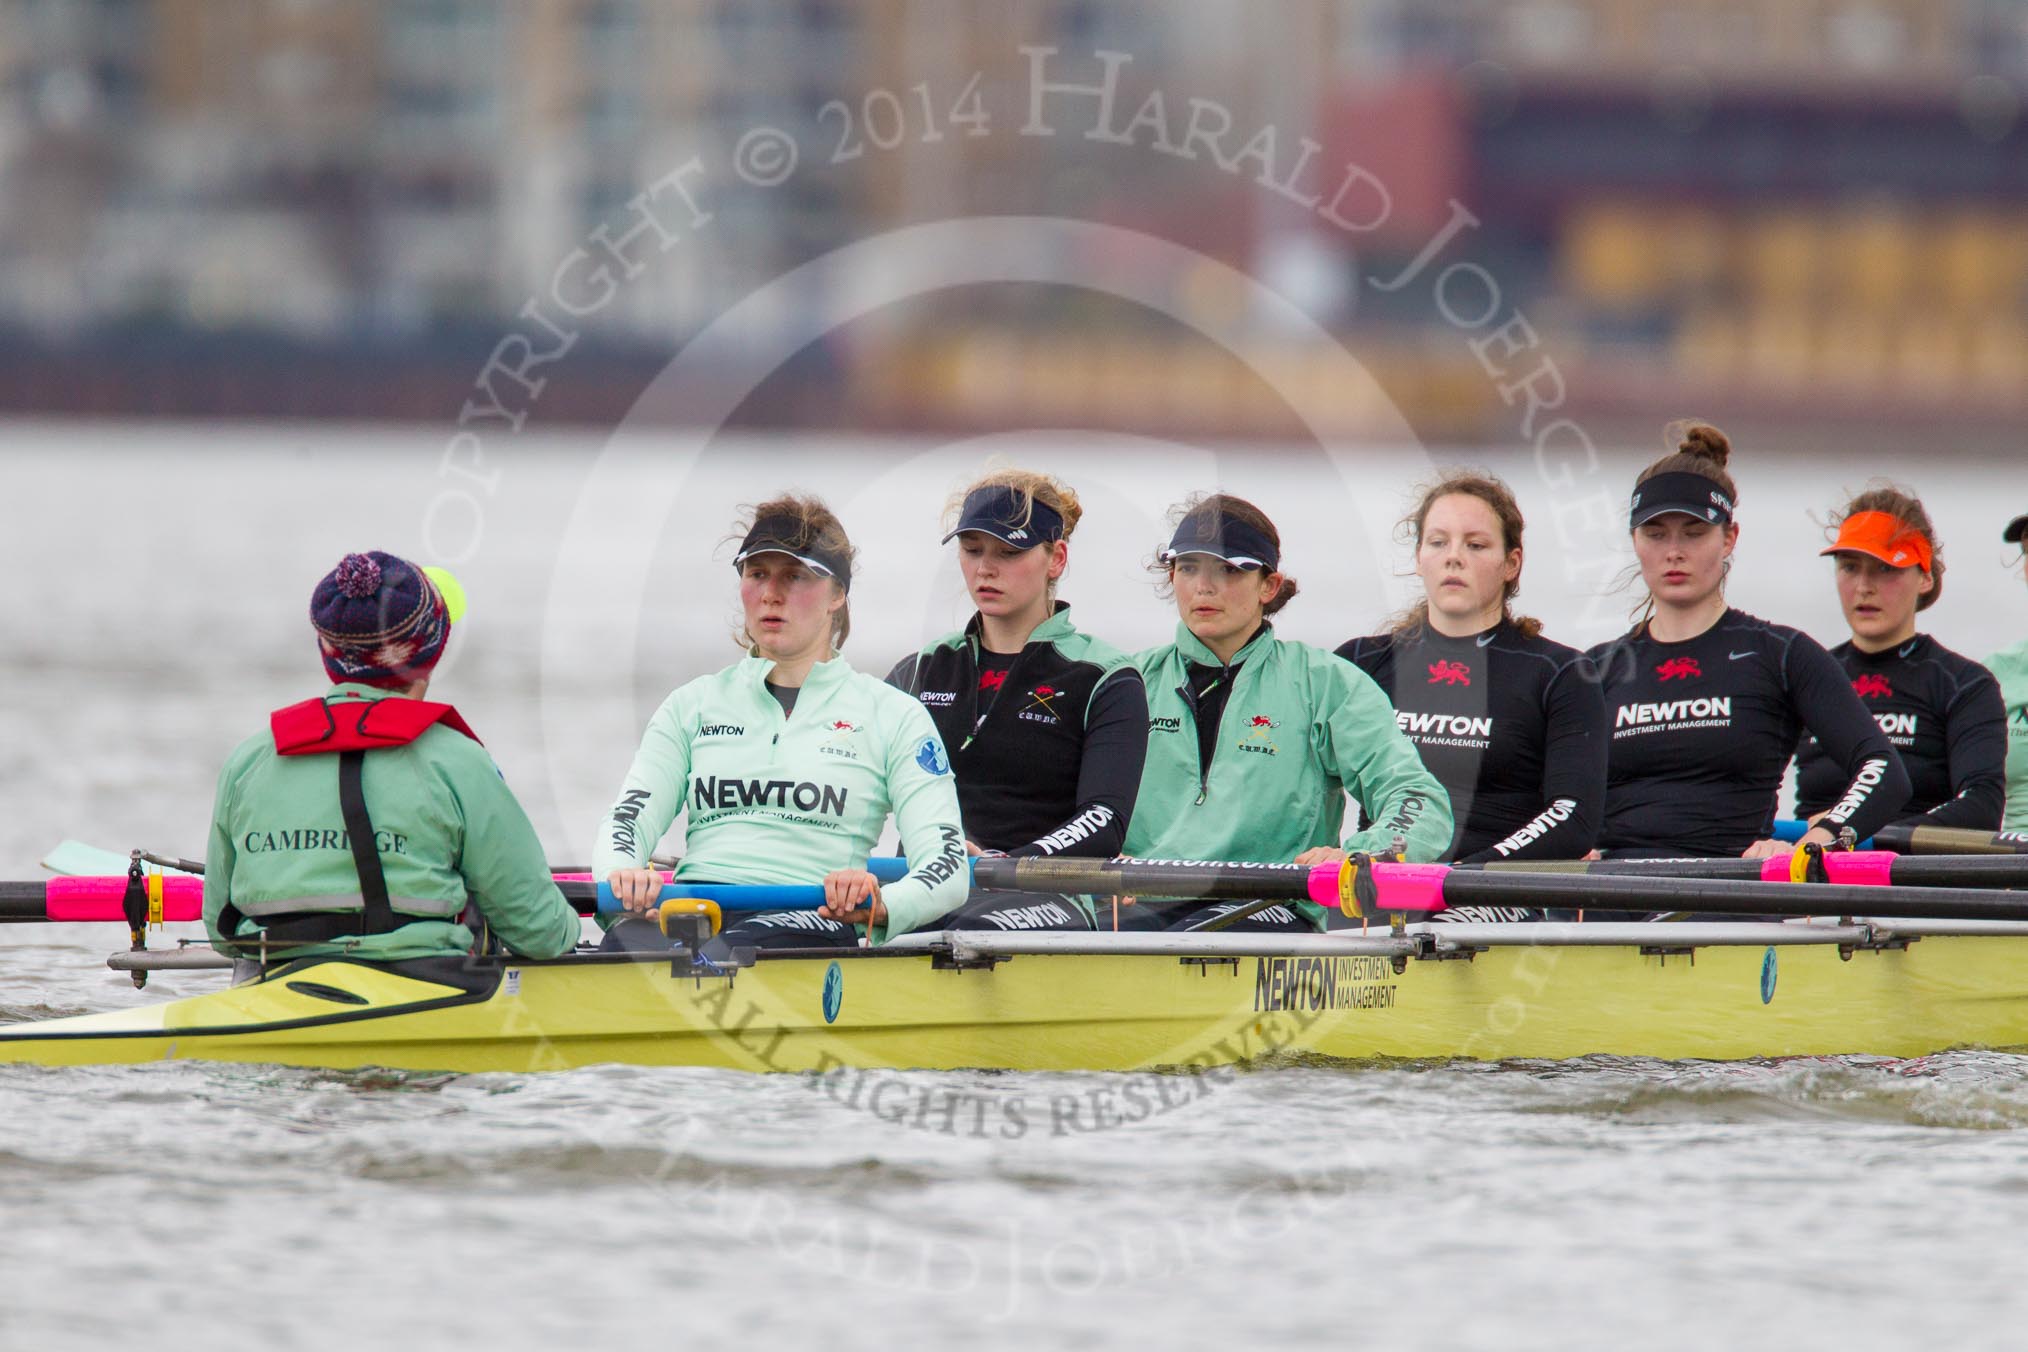 The Boat Race season 2014 - fixture CUWBC vs Thames RC.




on 02 March 2014 at 13:47, image #132